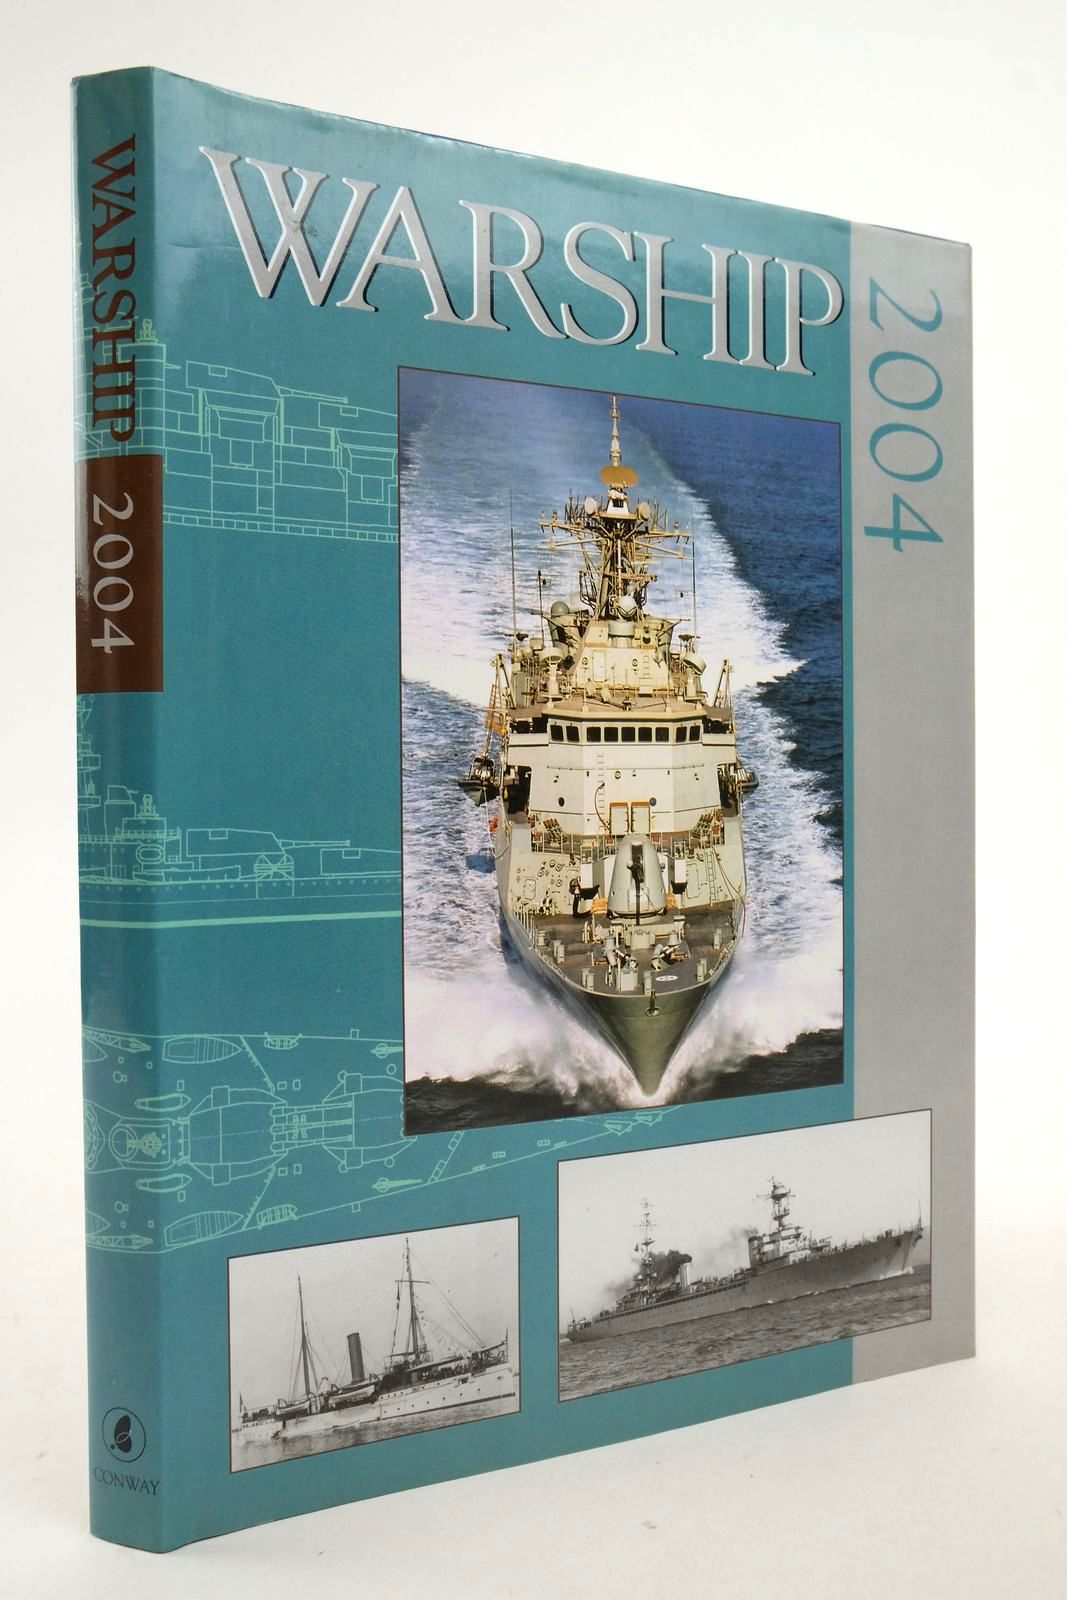 Photo of WARSHIP 2004 written by Preston, Antony Robson, Martin Dent, Stephen published by Conway Maritime Press (STOCK CODE: 2136670)  for sale by Stella & Rose's Books